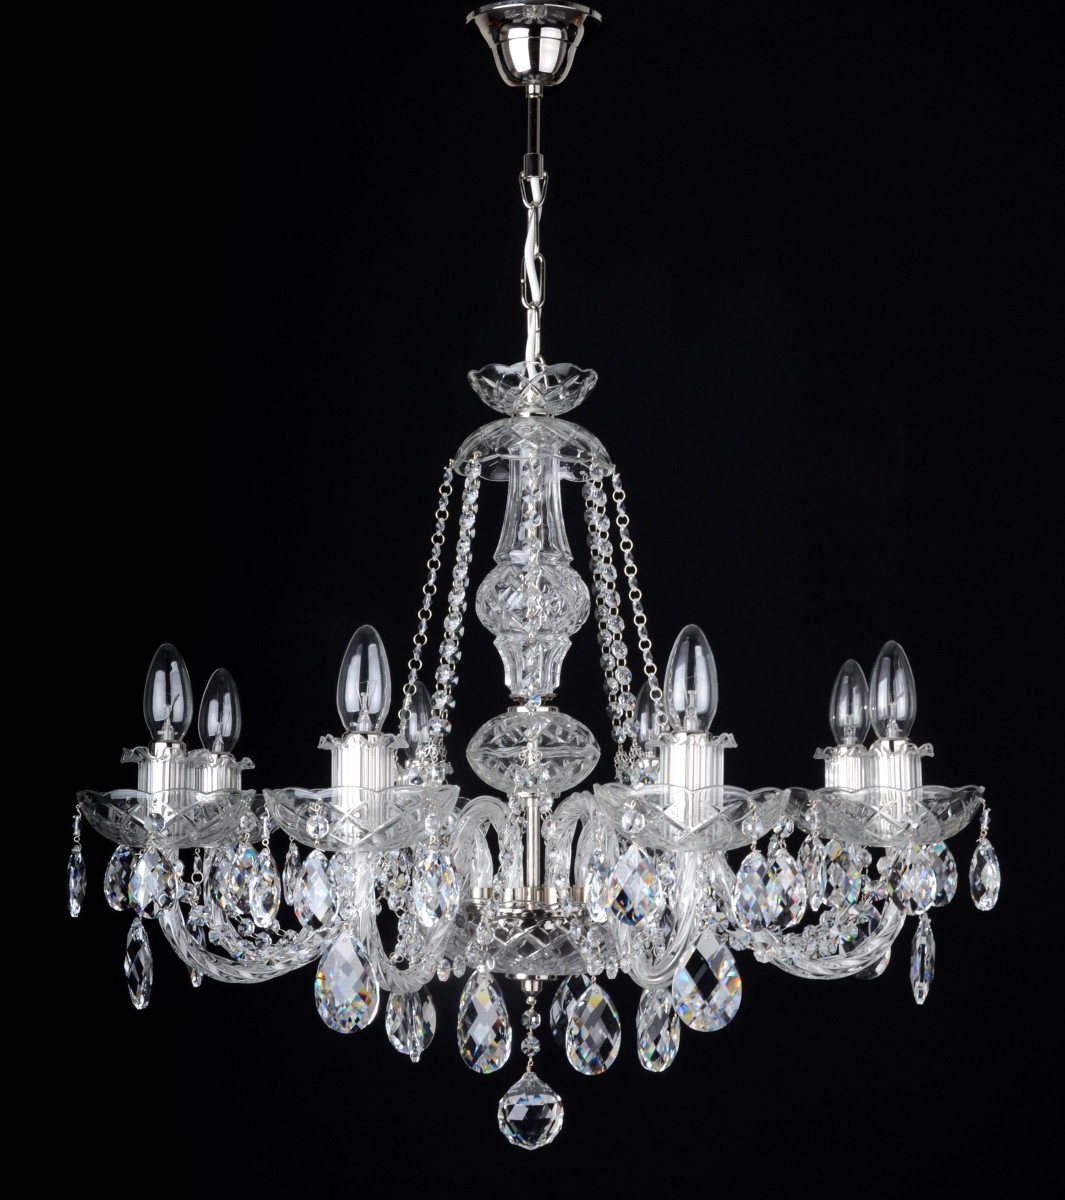 8 Arms Silver Swarovski Crystal, What Is A Crystal Chandelier